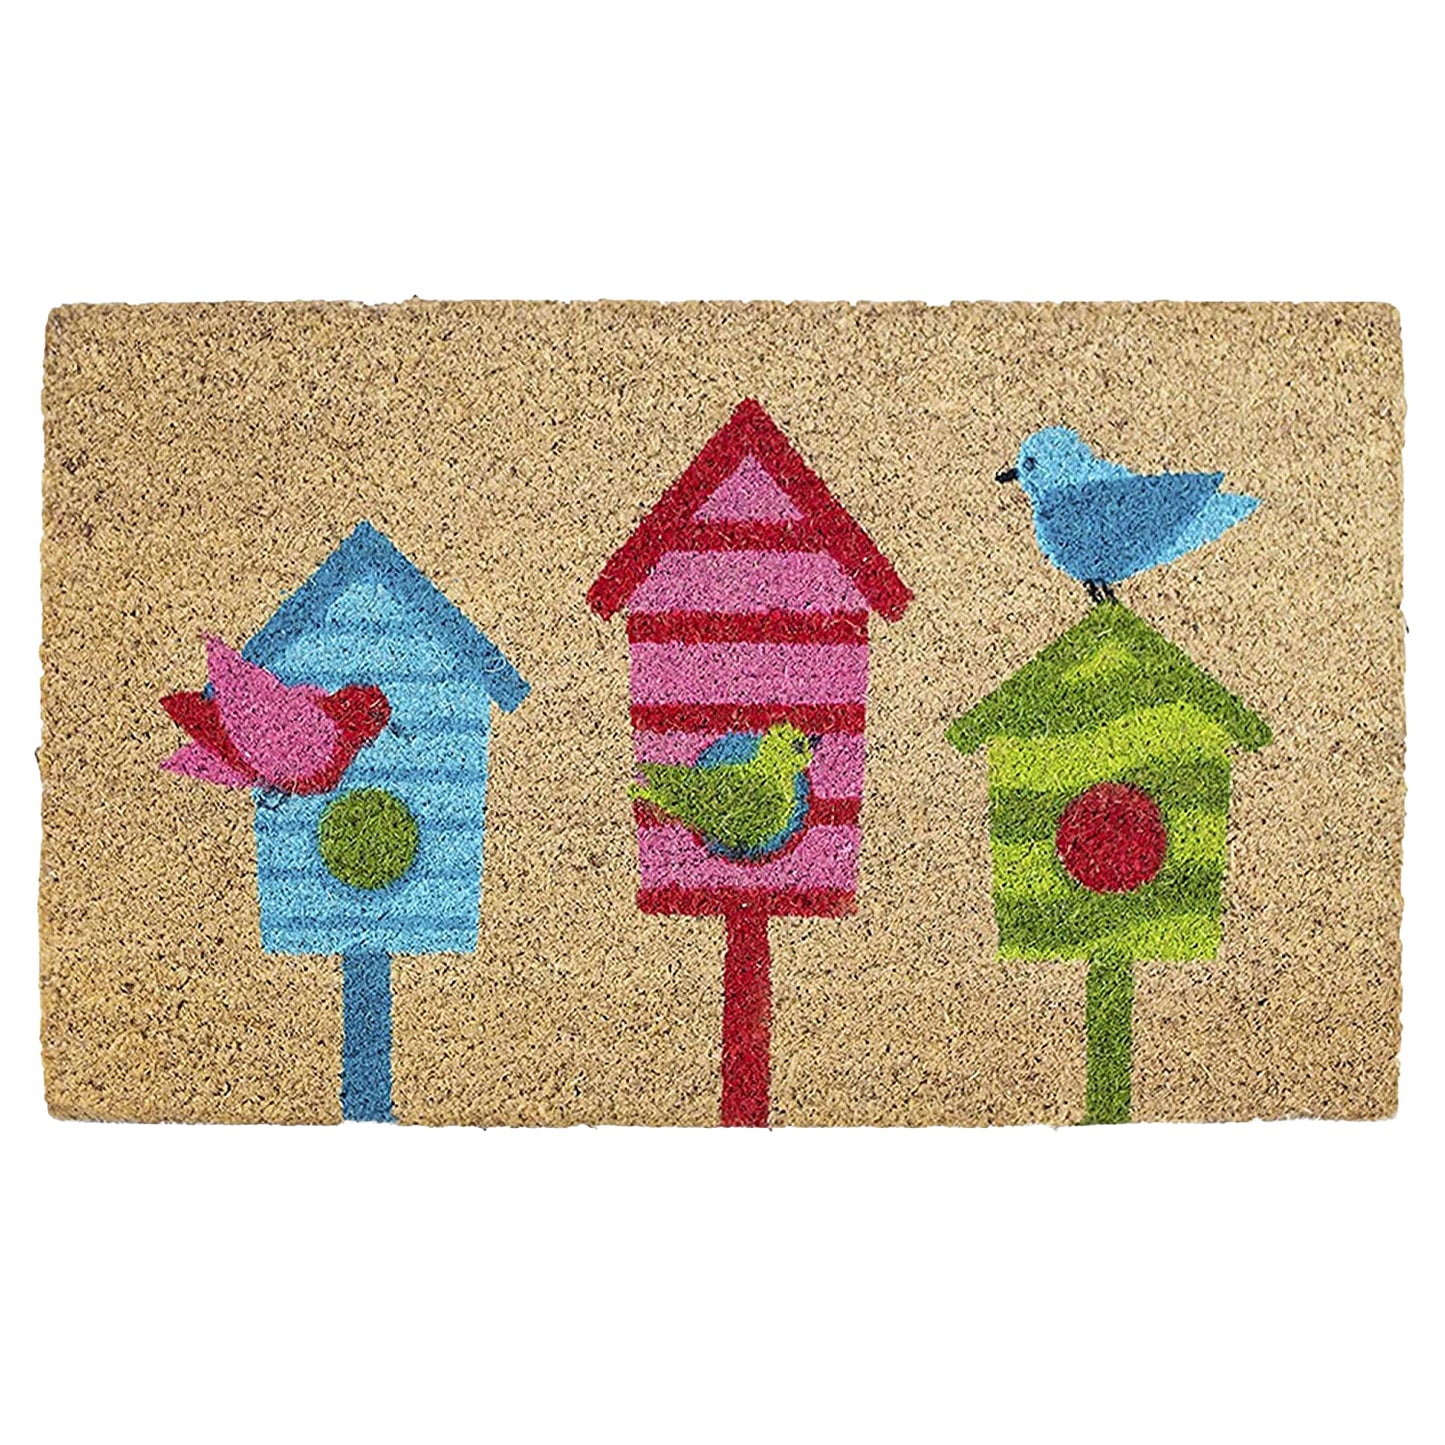 Avera Products Trio of Brids and Birdhouses Spring Doormat